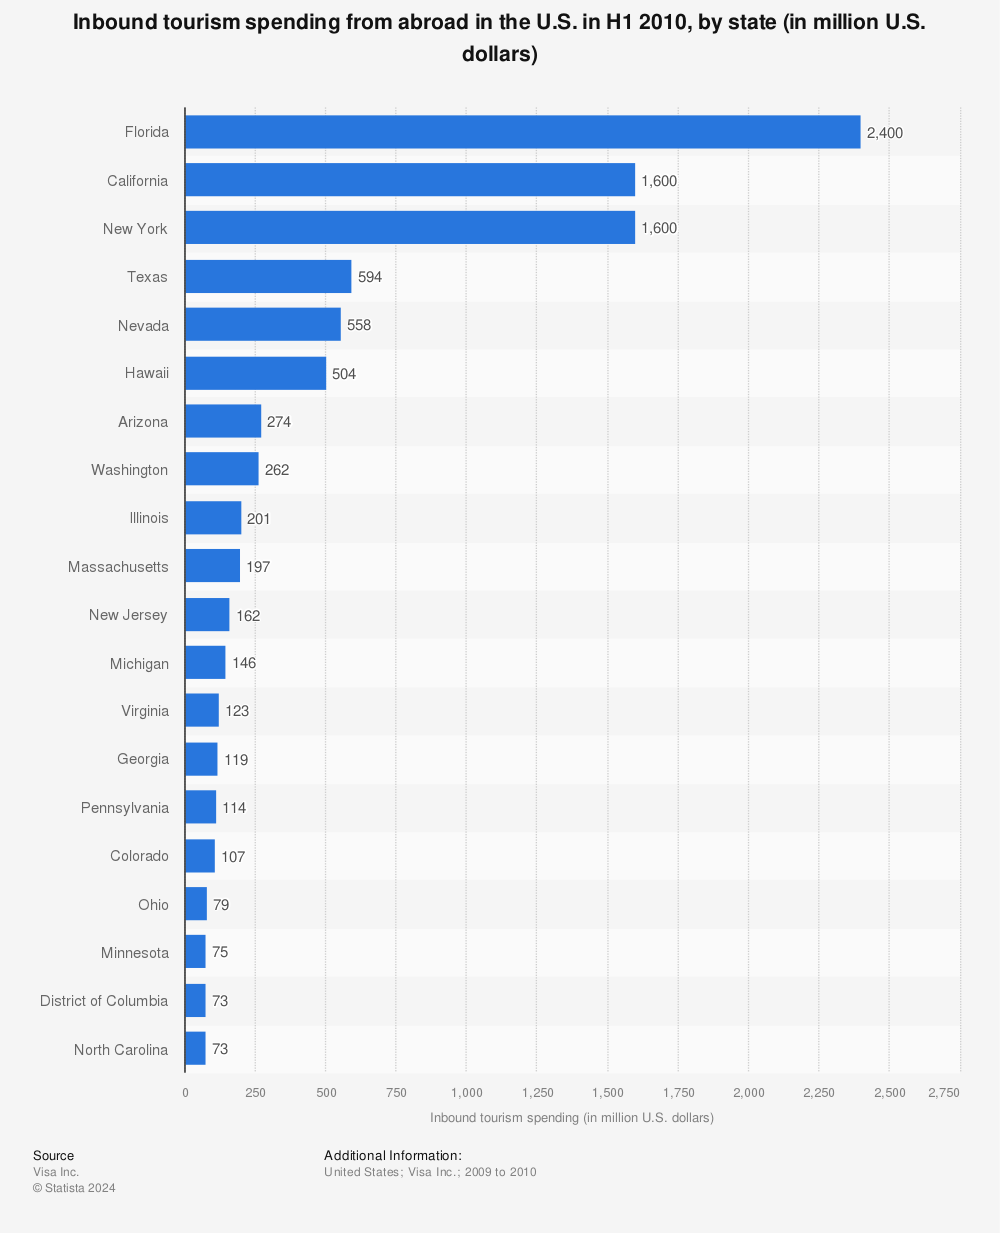 Statistic: Inbound tourism spending from abroad in the U.S. in H1 2010, by state (in million U.S. dollars) | Statista